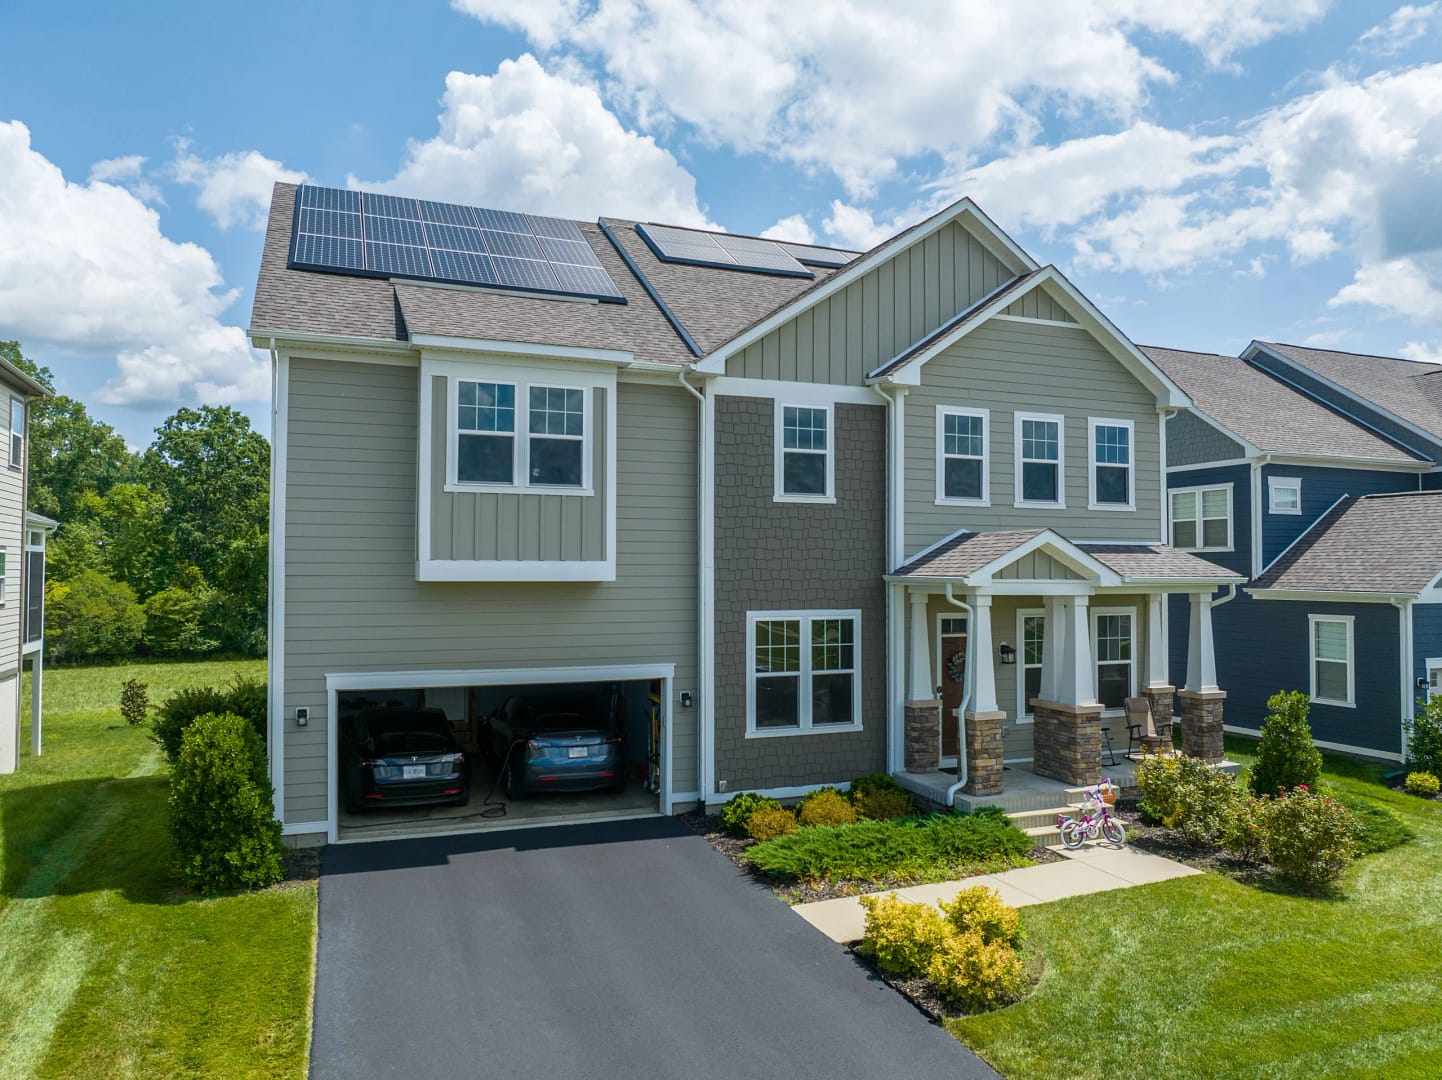 suburban home with solar panels